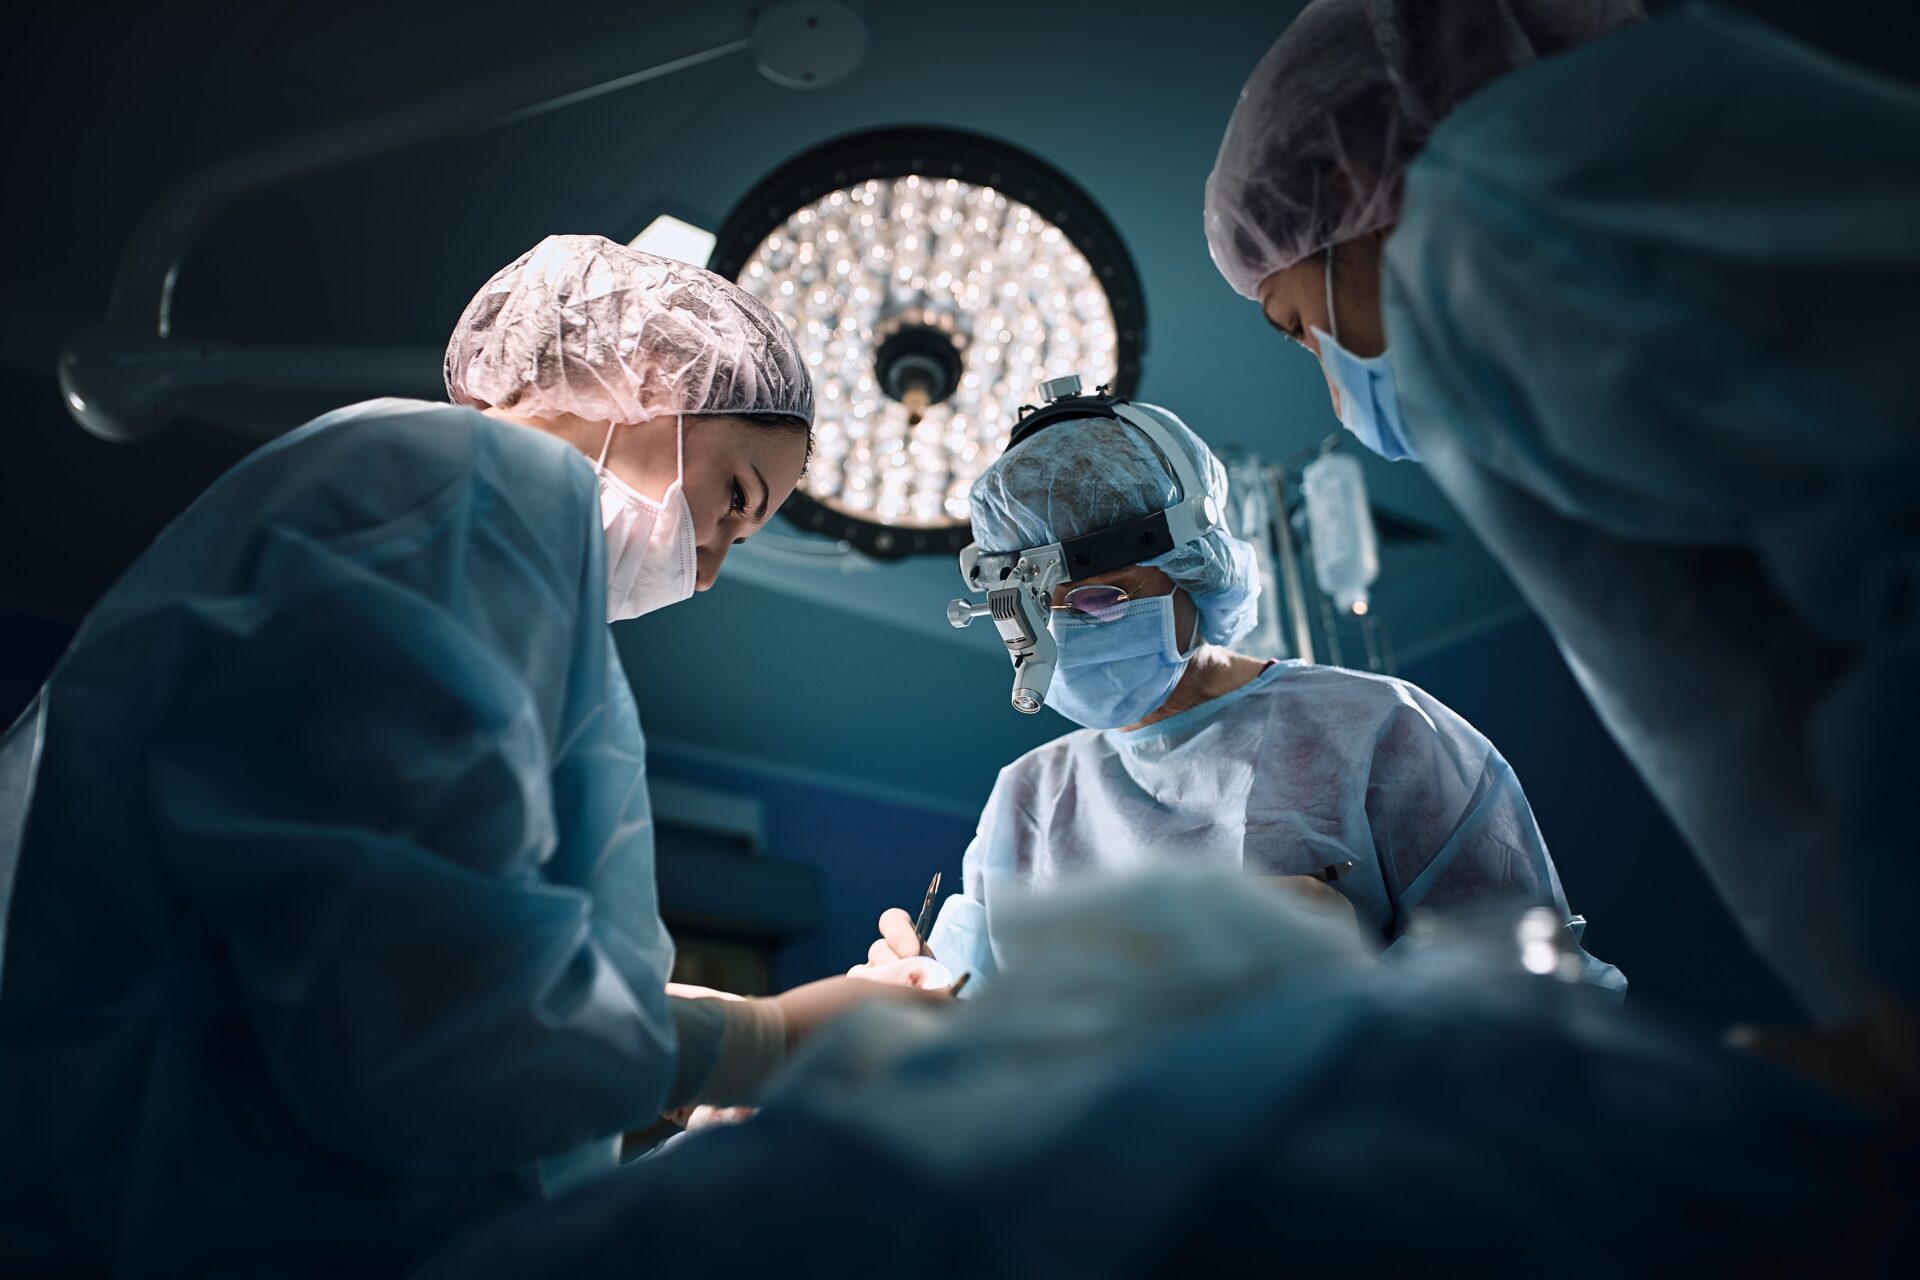 Reducing mortality rates and improving patient care in emergency laparotomy surgical procedures